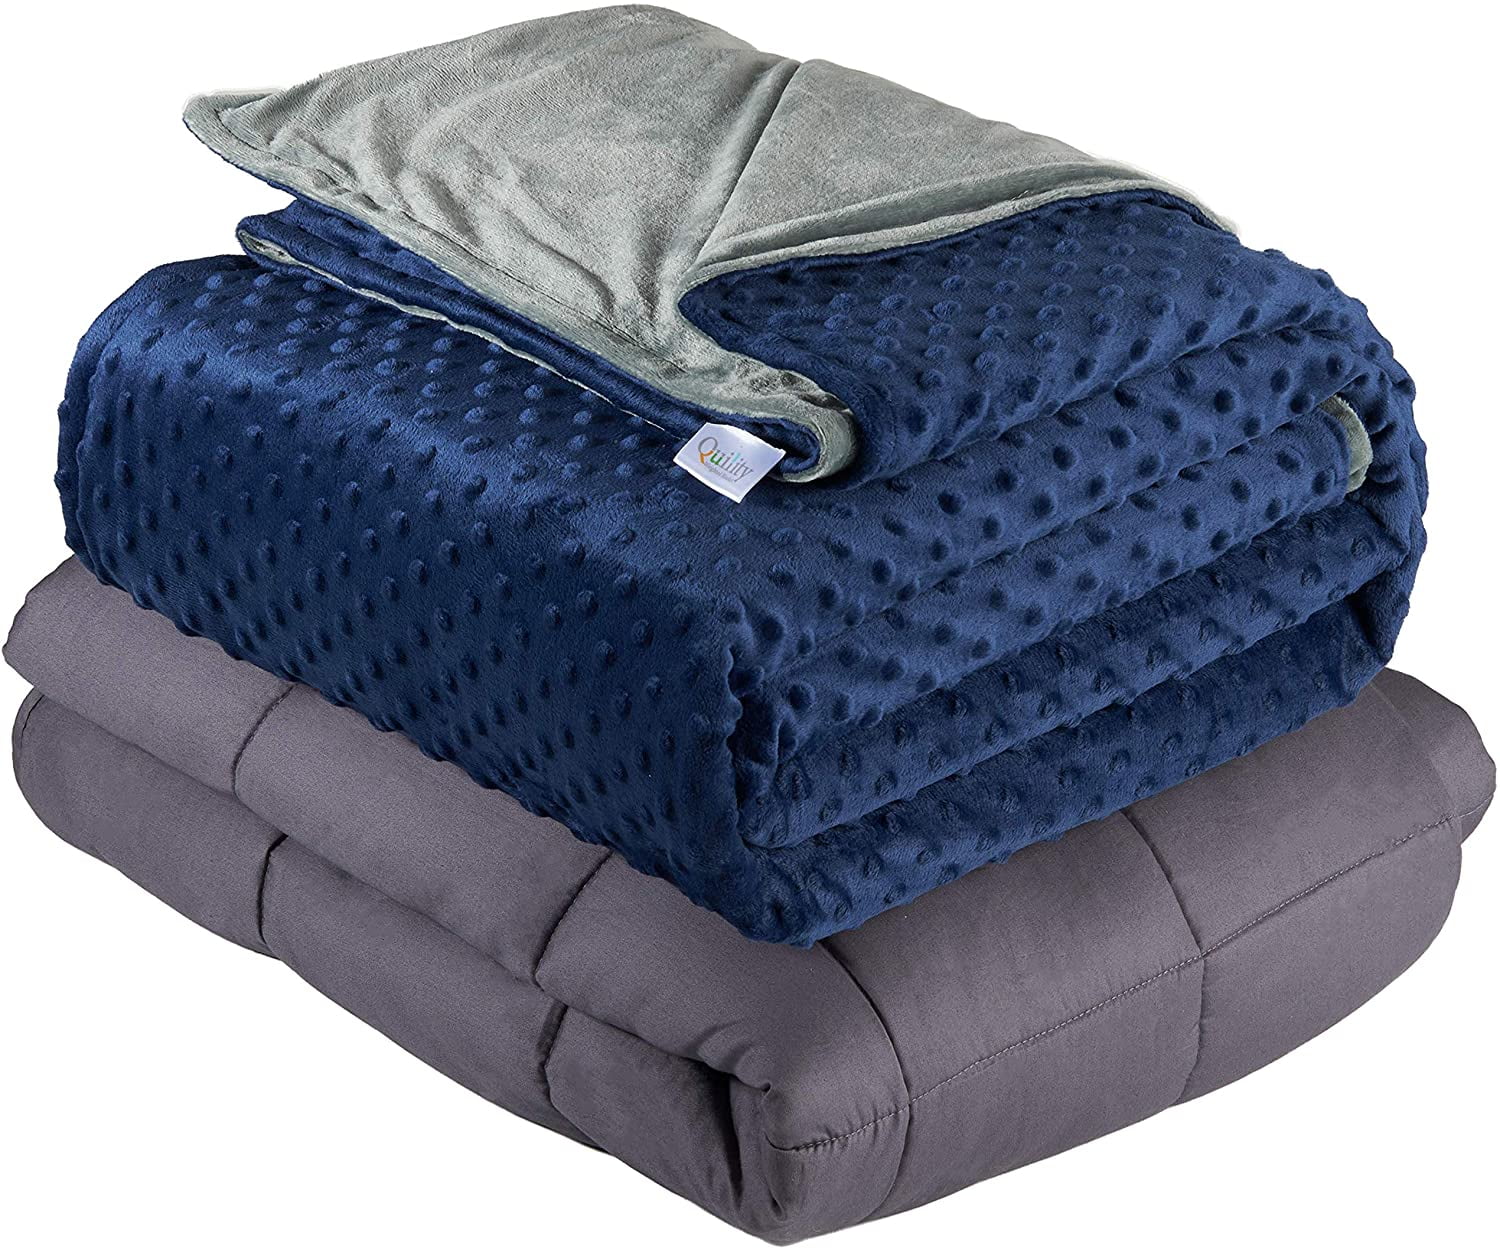 Quility Weighted Blanket for Adults - King Size, 86"x92", 20 lbs